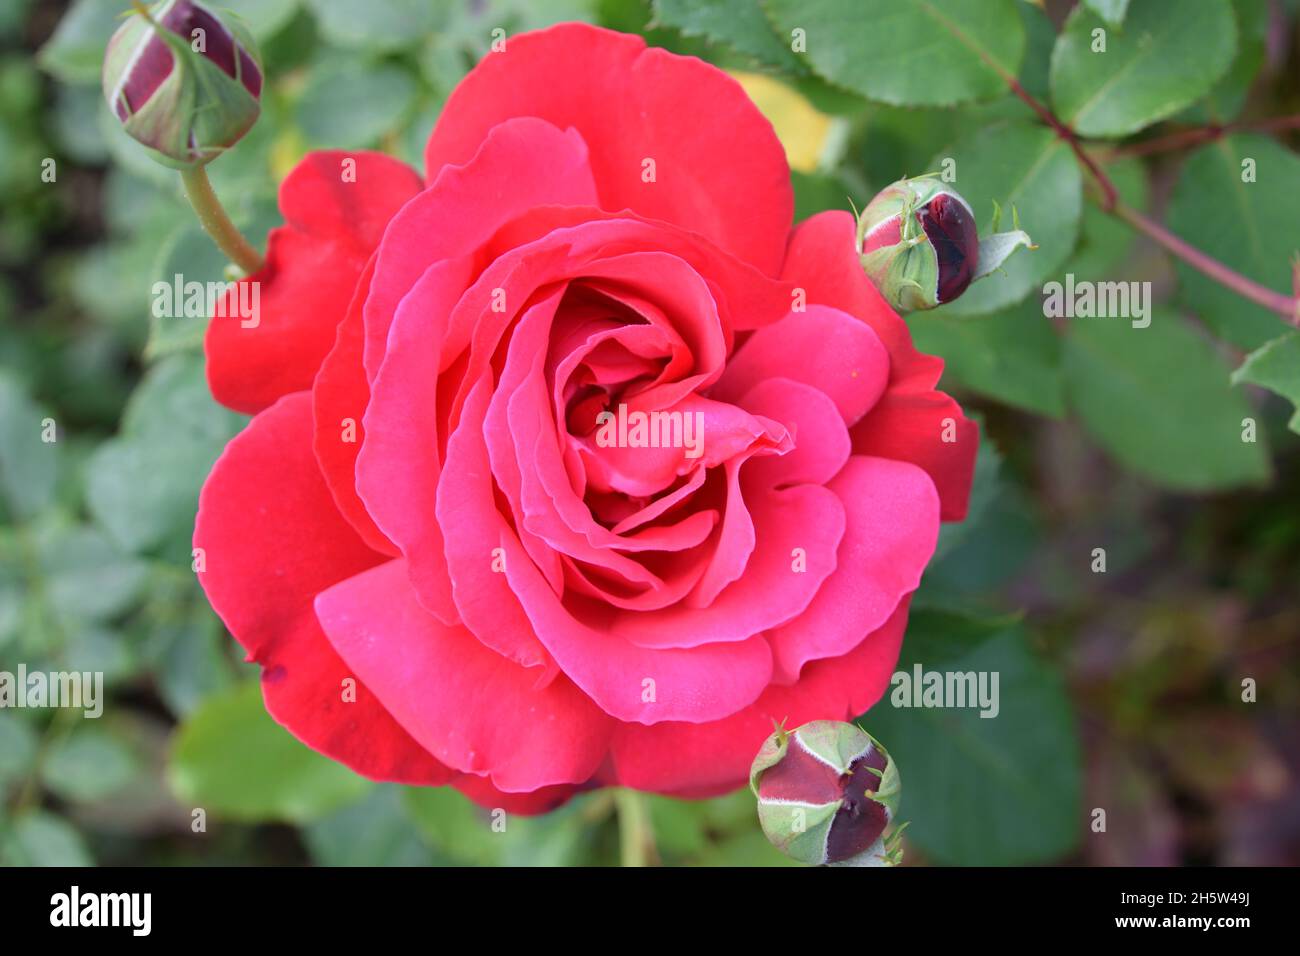 Closeup of Pink Rose single flower with leaves in background and buds. Stock Photo